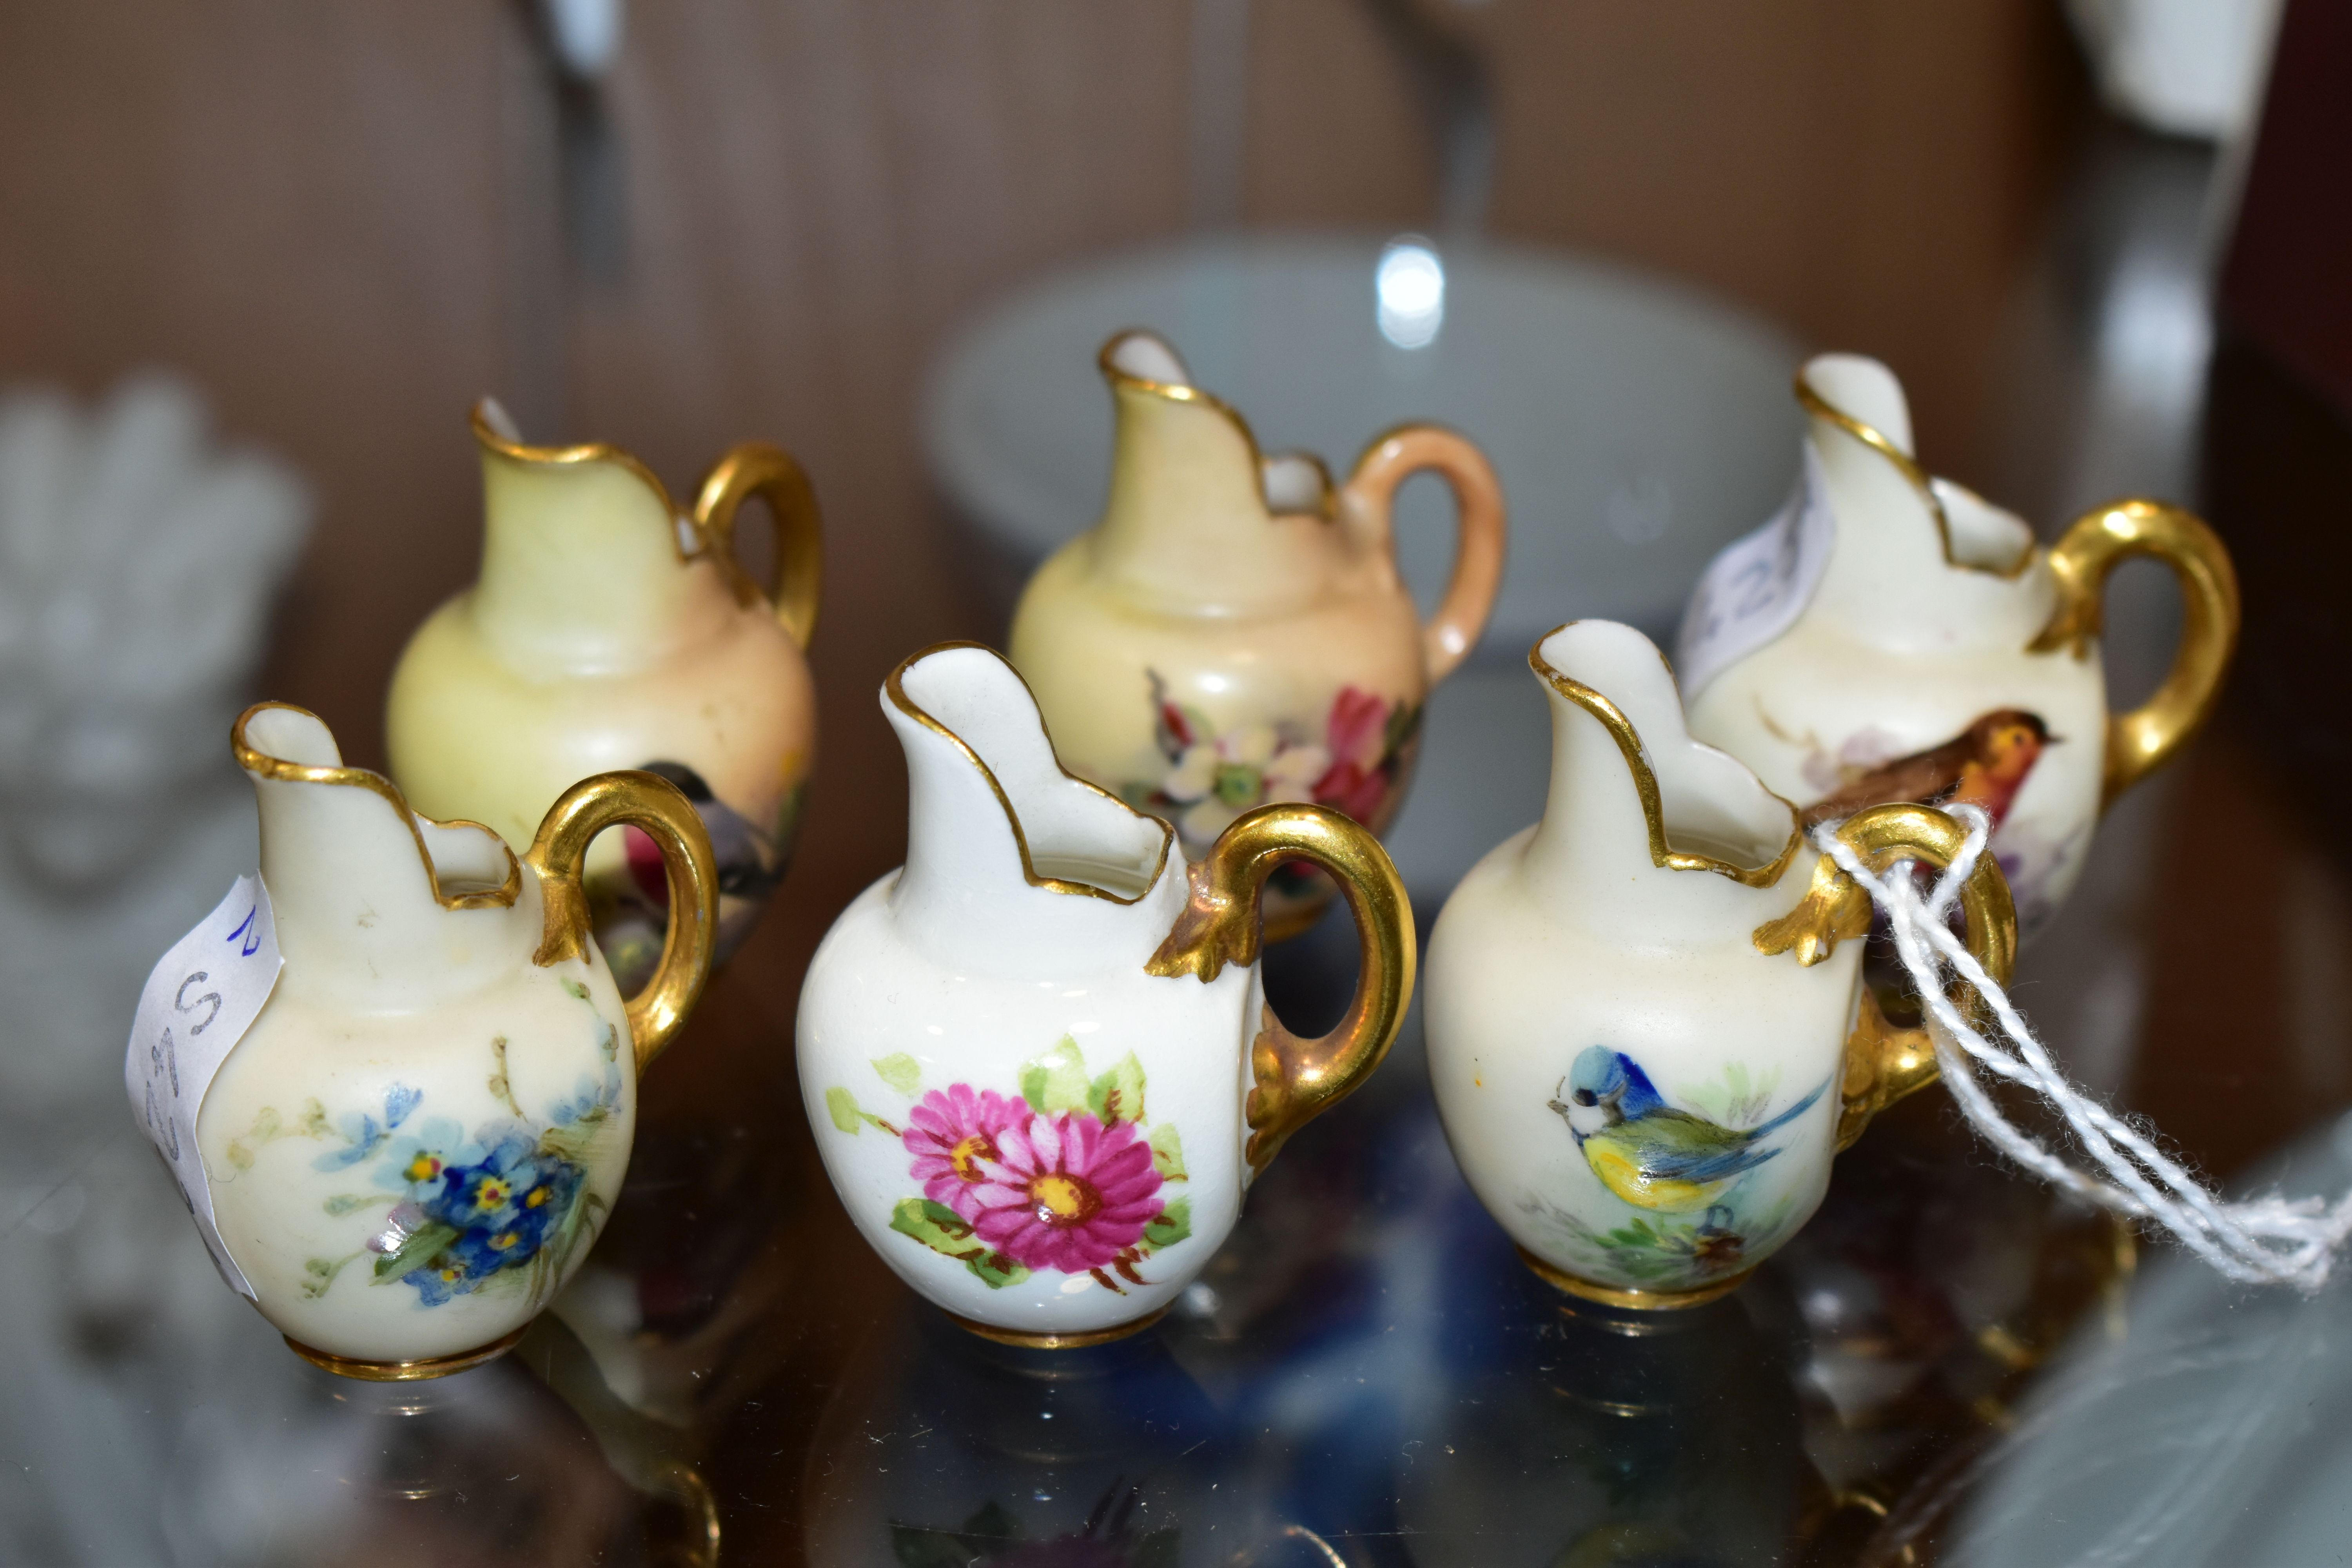 SIX ROYAL WORCESTER MINIATURE JUGS, three painted with British Birds - Bull Finch, Blue Tit and